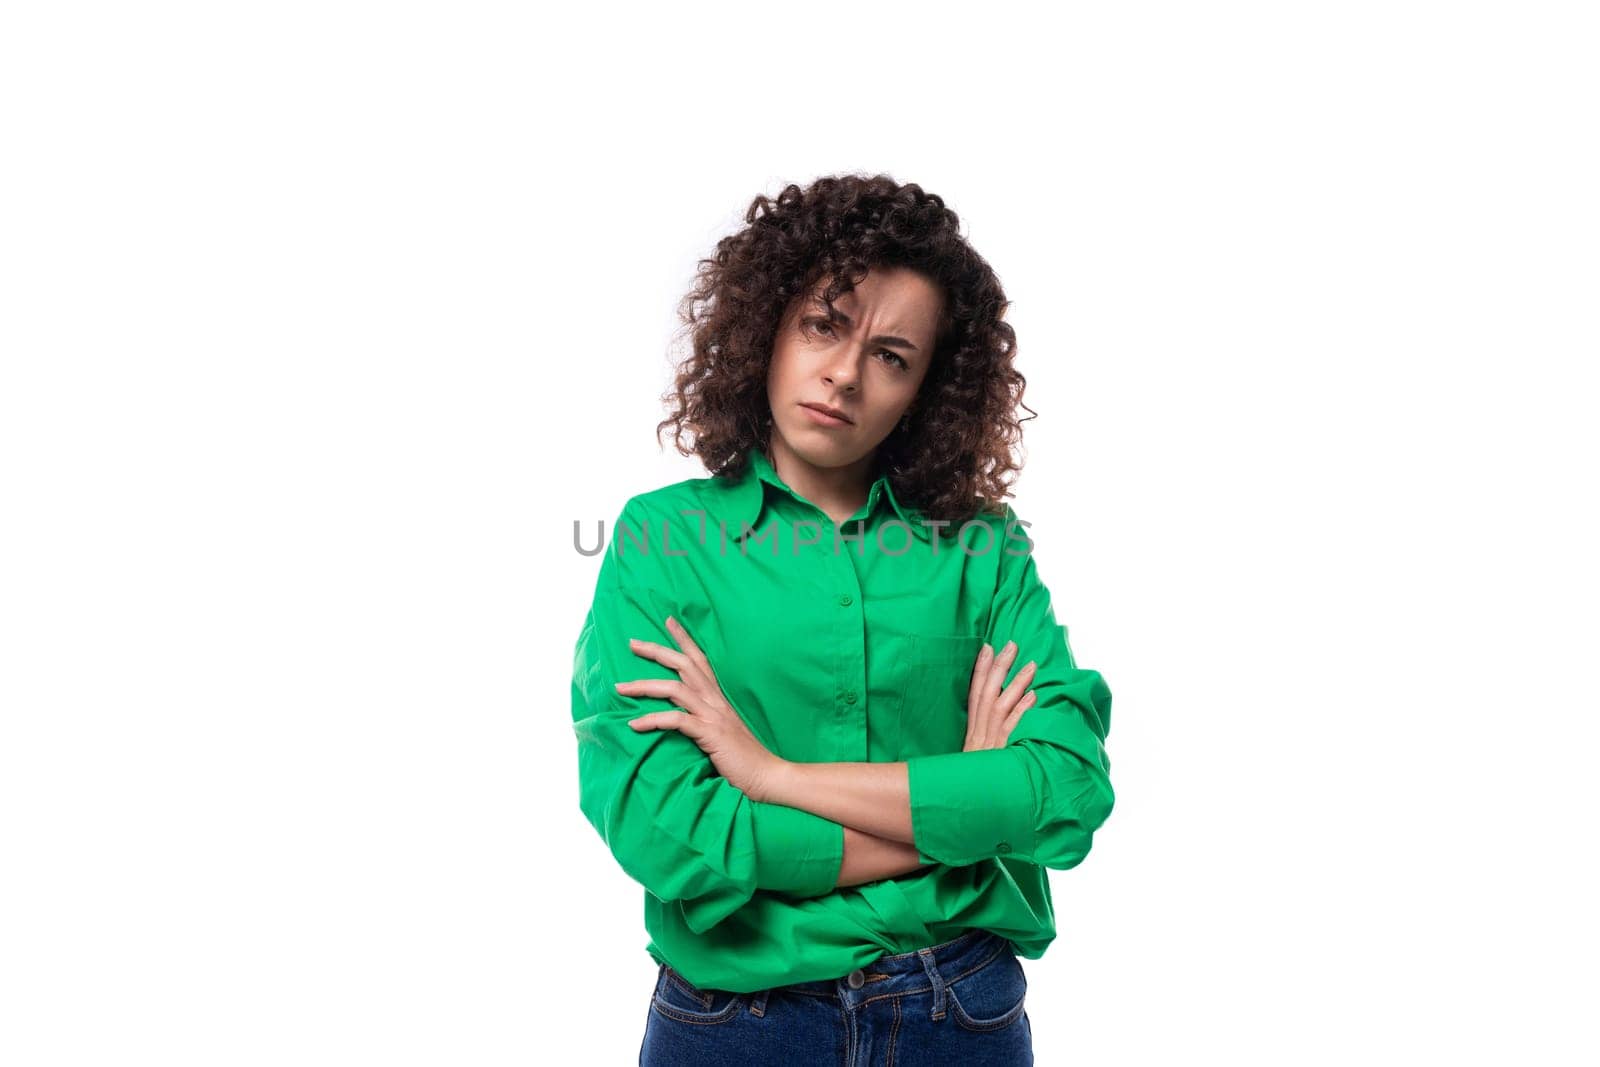 serious young woman with black curly hair dressed in a green shirt on a white background by TRMK